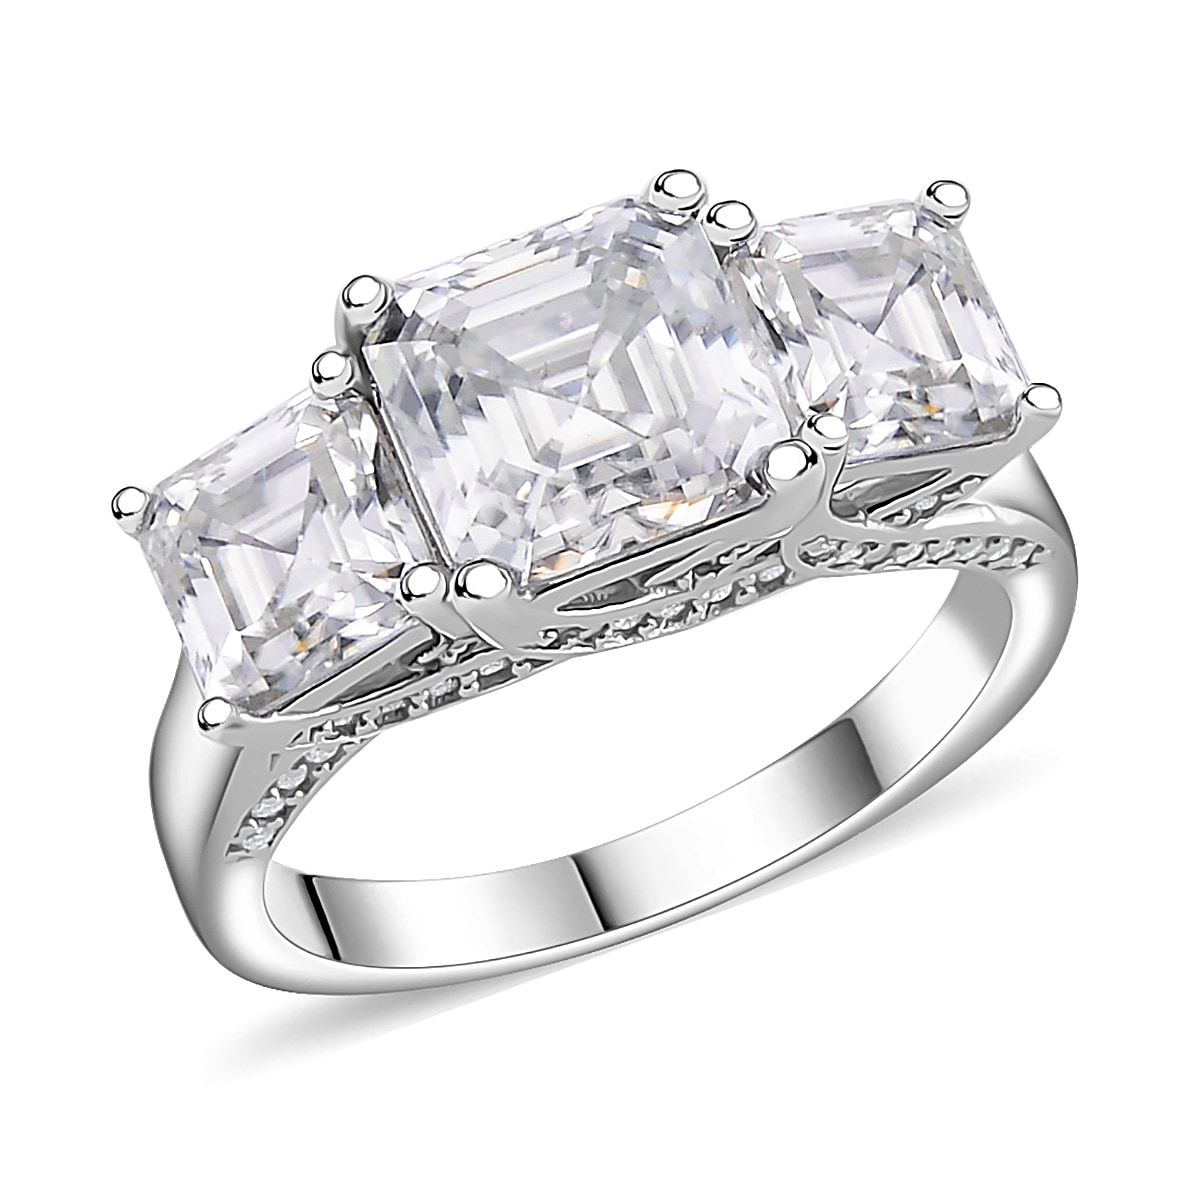 White Moissanite 3-Stone Trilogy Ring in Platinum Overlay Sterling Silver 4.82 ct  4.820  Ct.